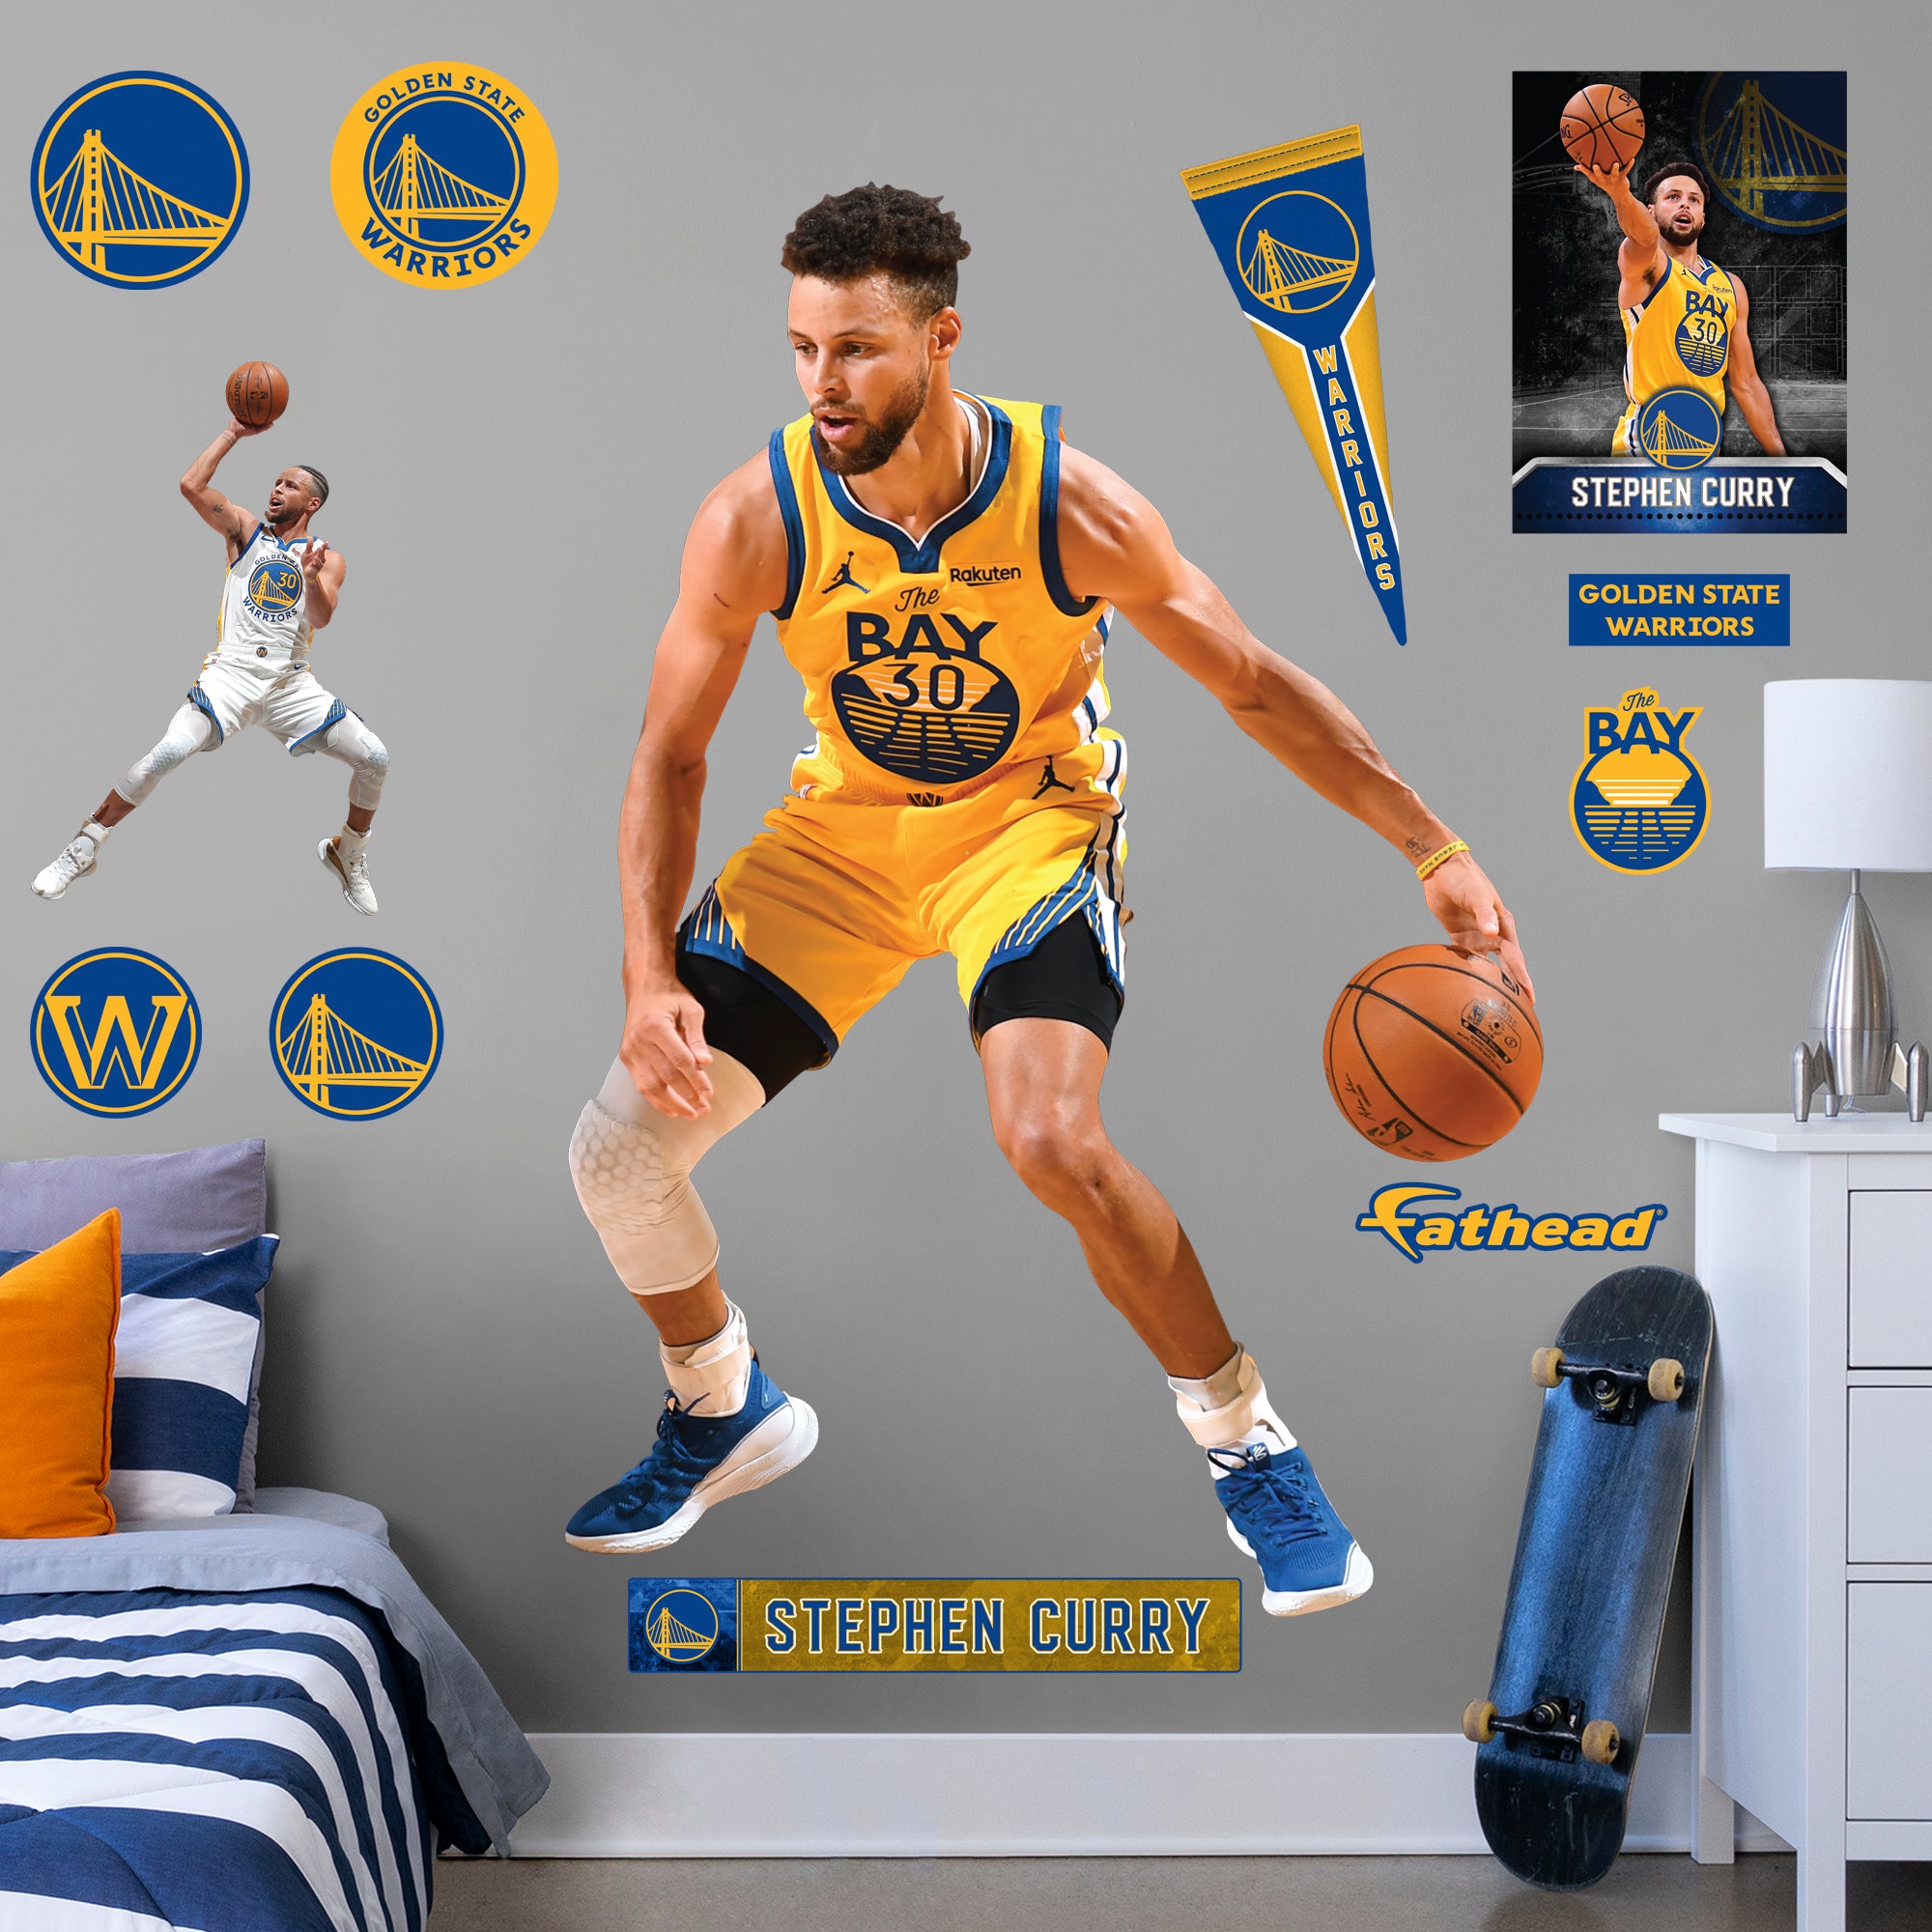 Stephen Curry 2021 The Bay - Officially Licensed NBA Removable Wall Decal Life-Size Athlete + 11 Decals (51"W x 74"H) by Fathead